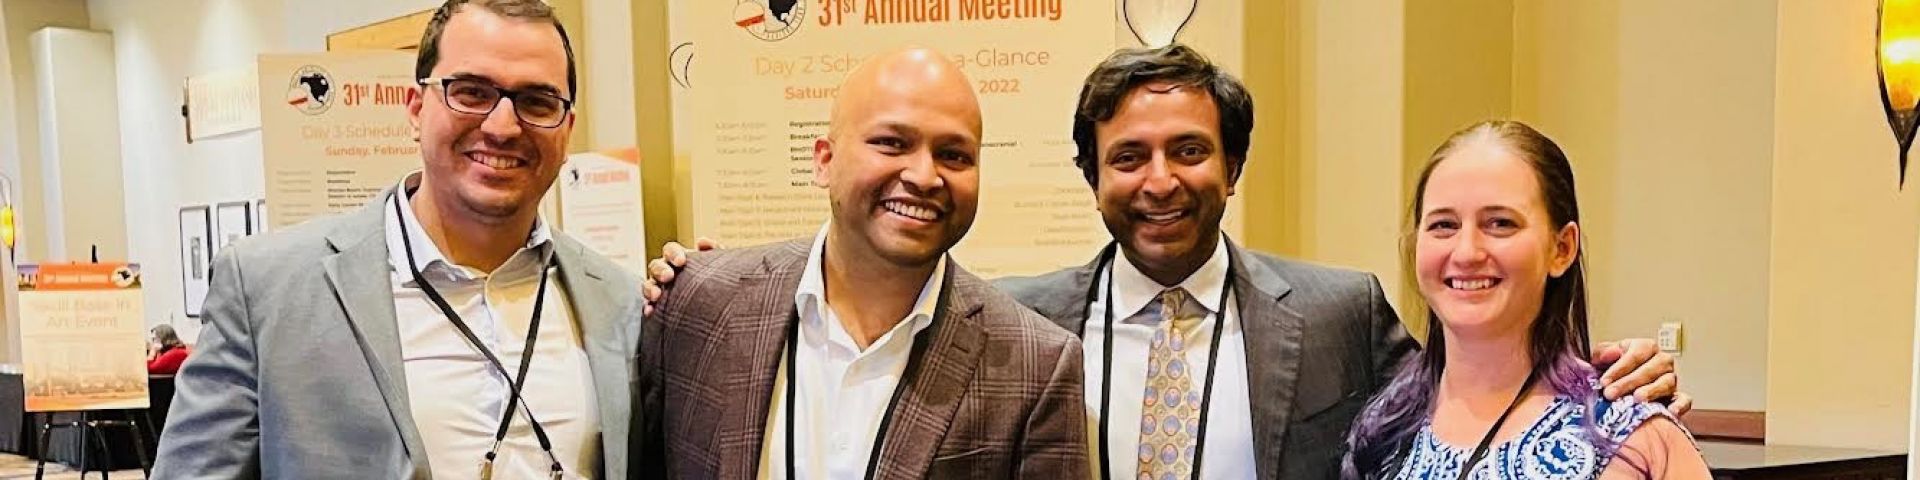 Thakur invited to speak at the North American Skull Base Society Annual Meeting